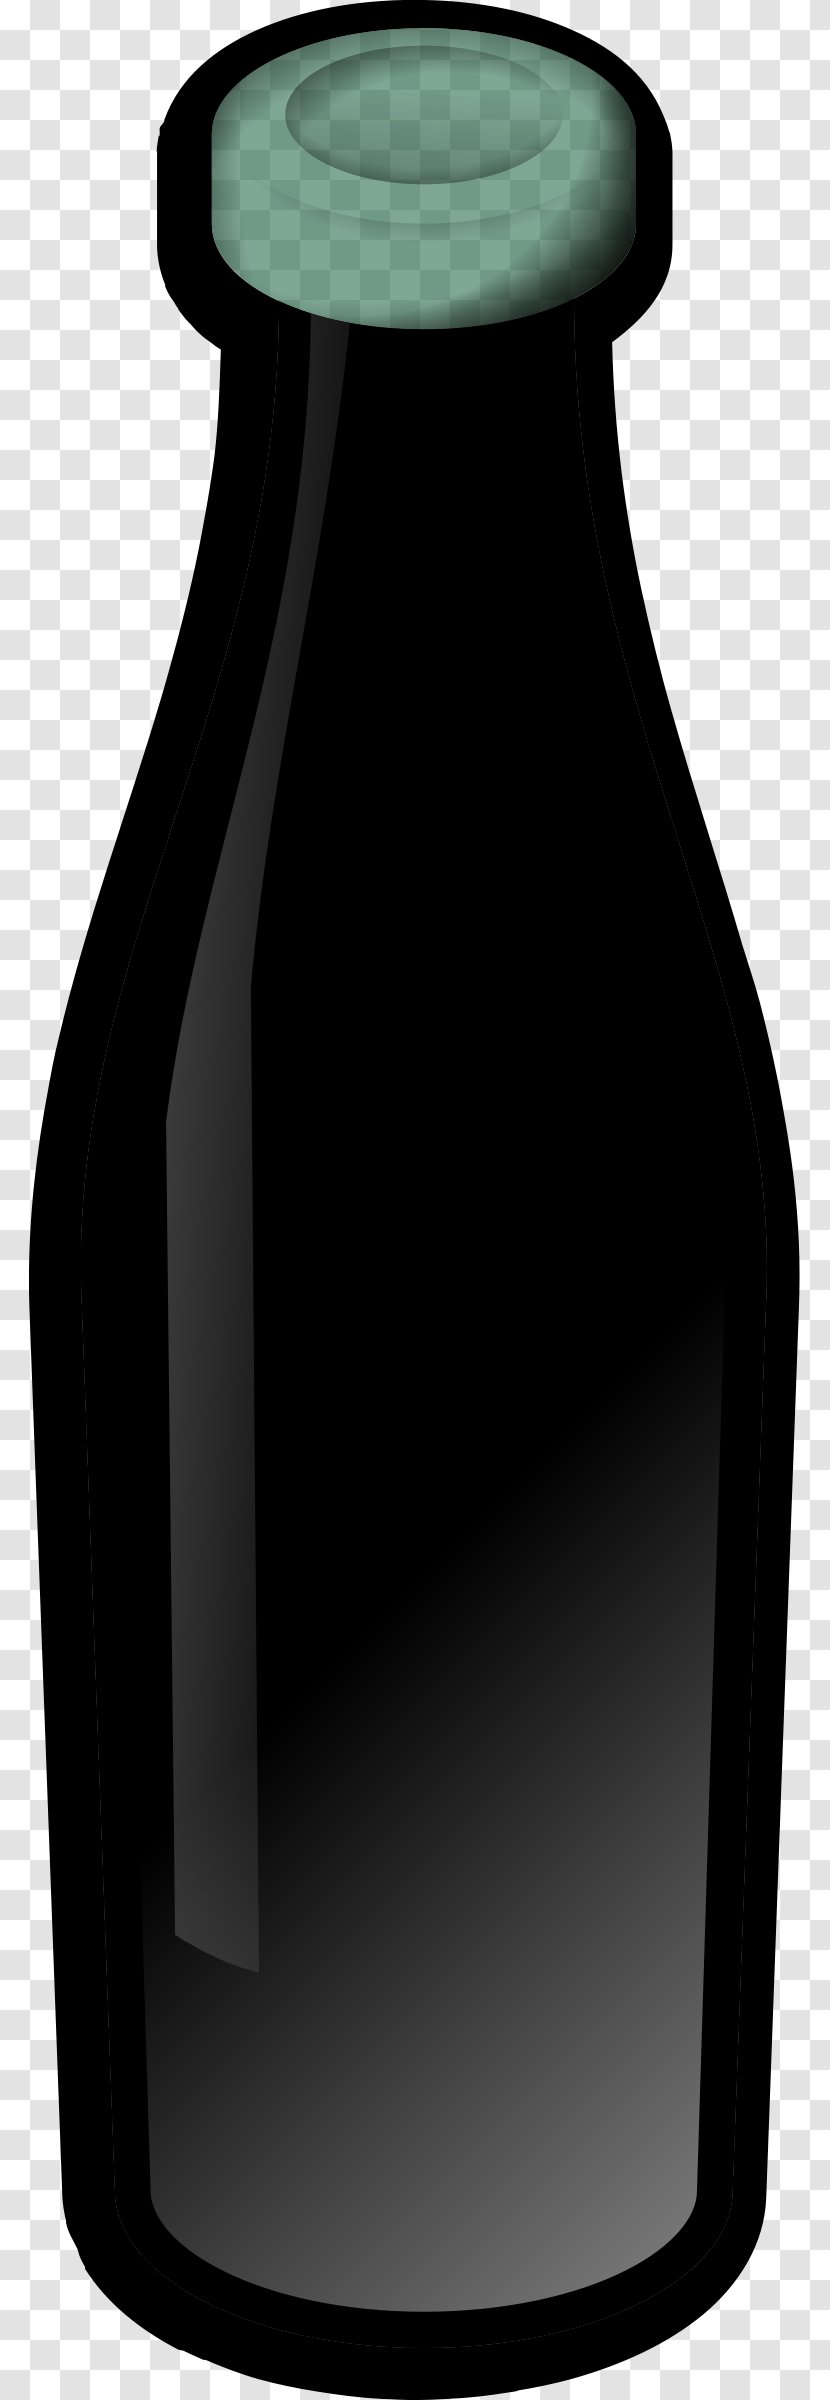 Glass Bottle Recycling Transparent PNG